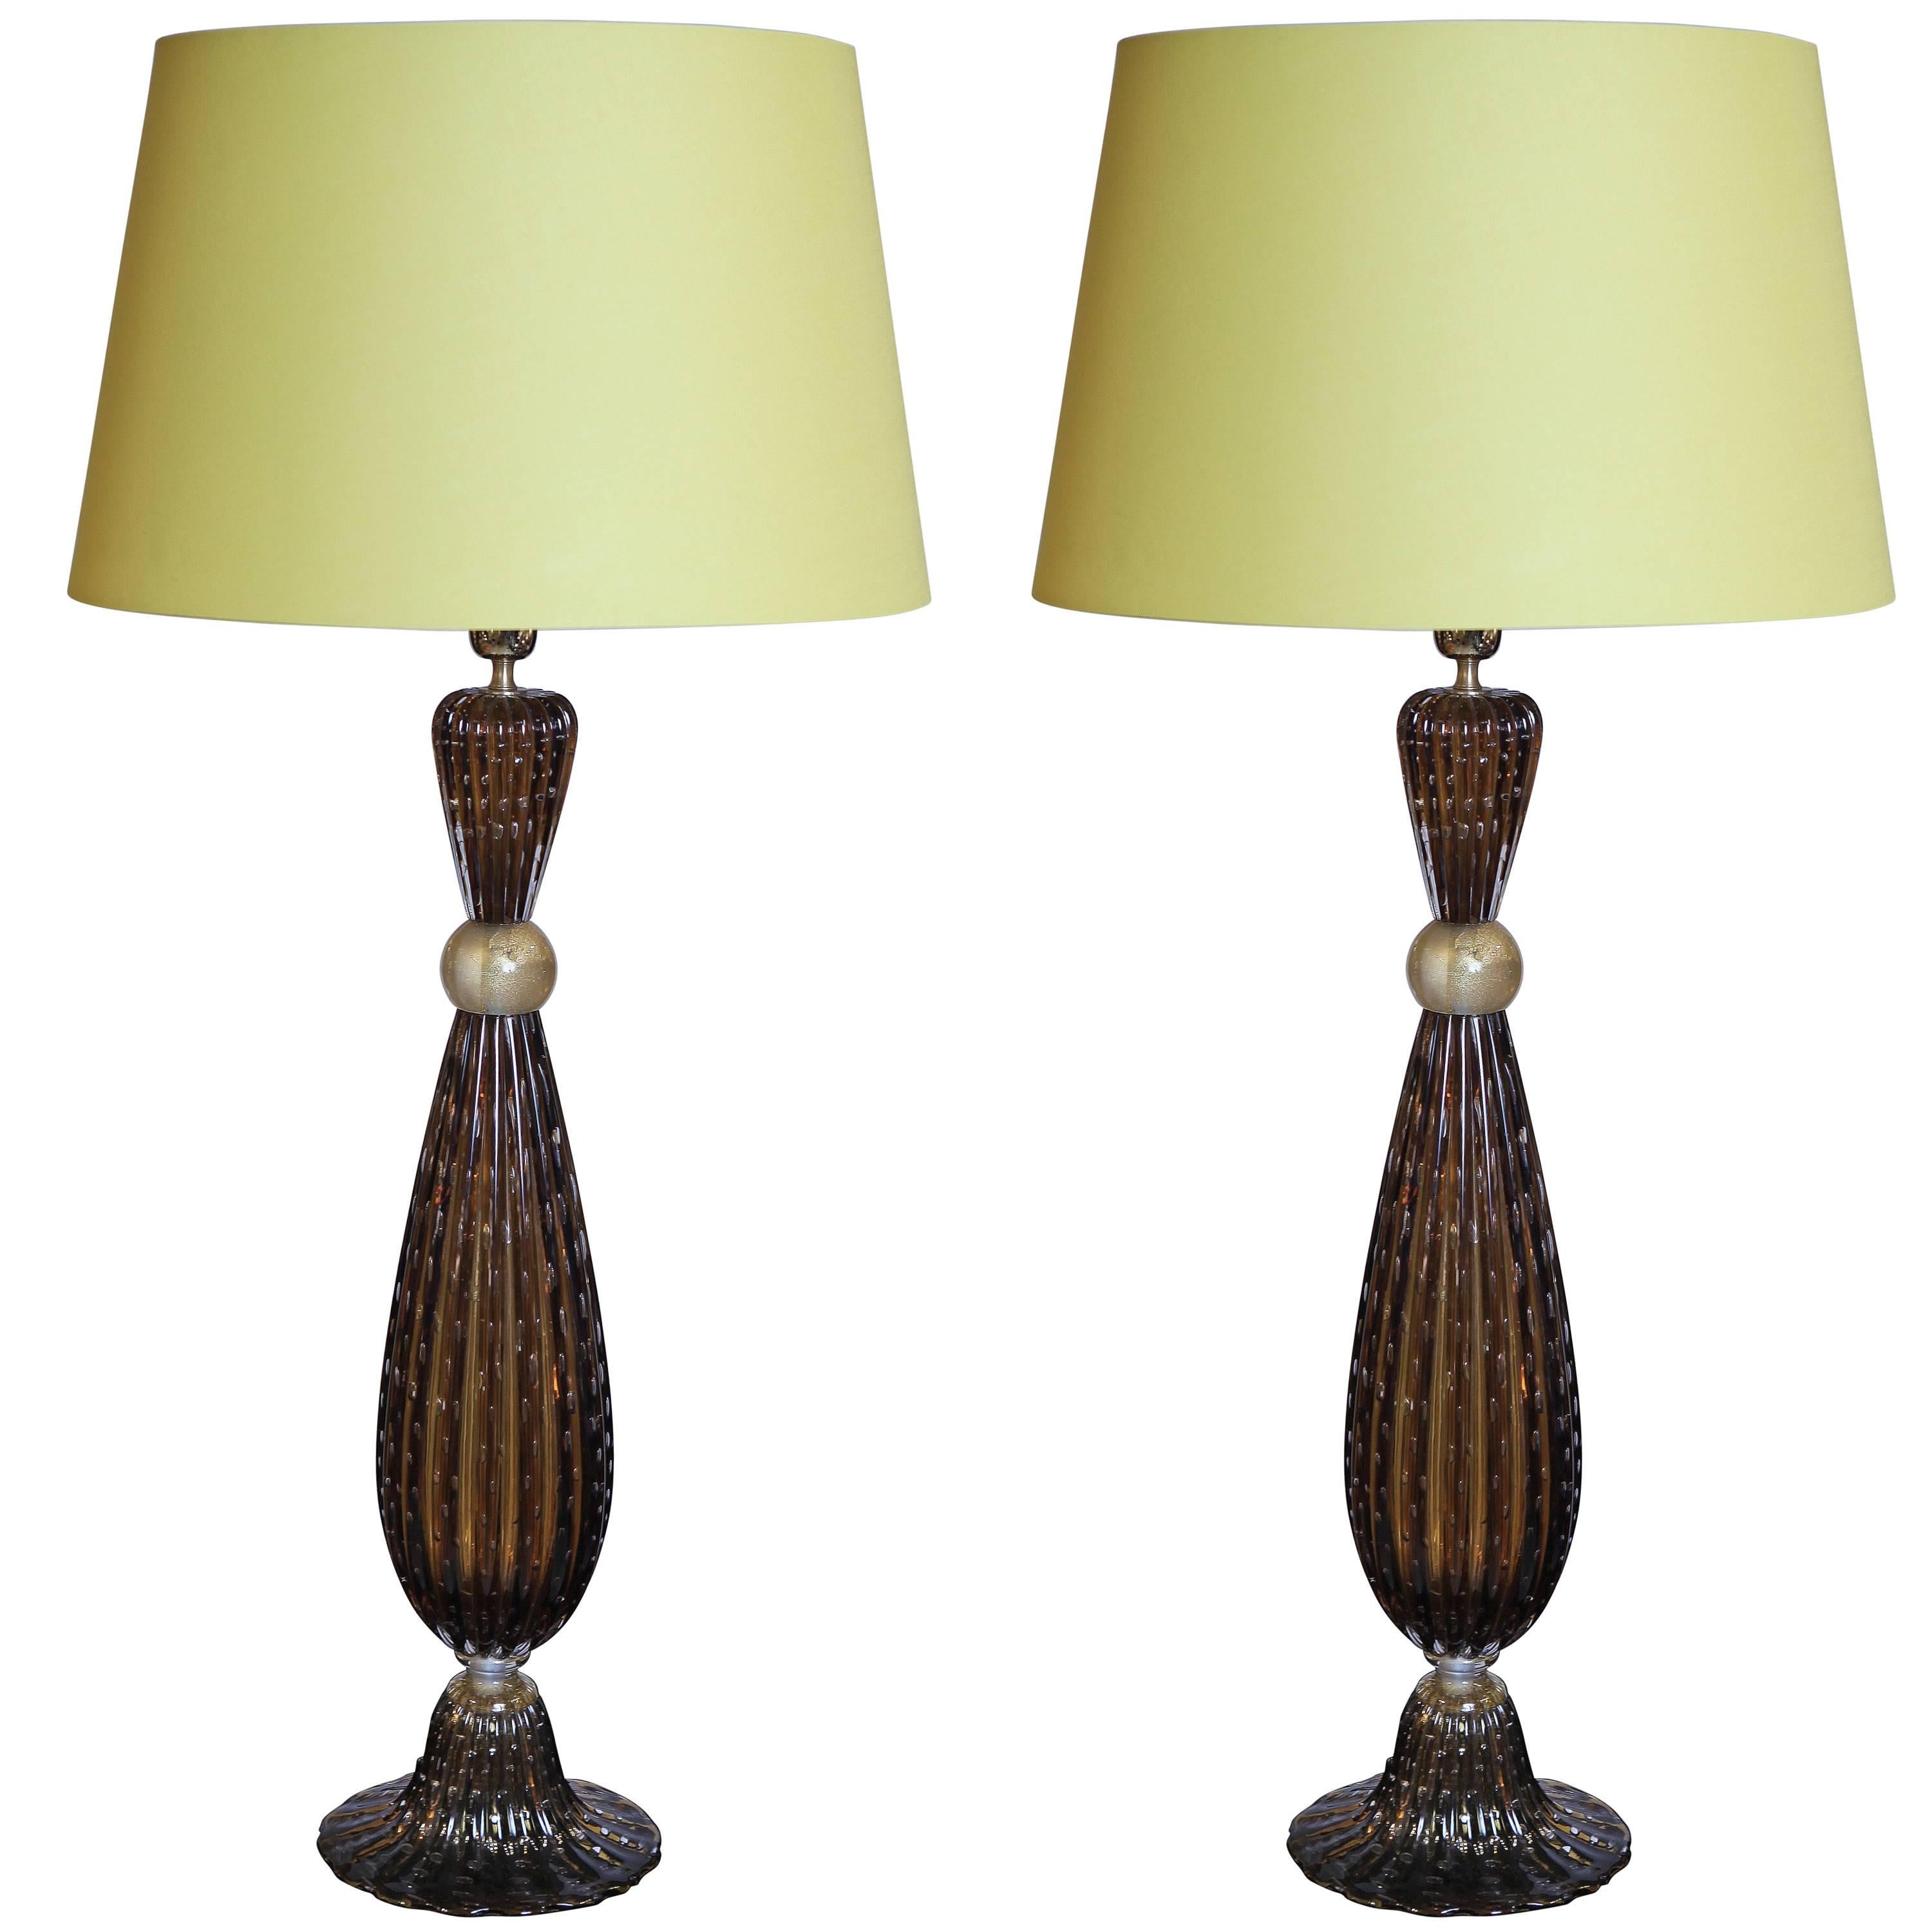 Pair of Murano Glass Tall Lamps in the Style of Barovier, circa 1997